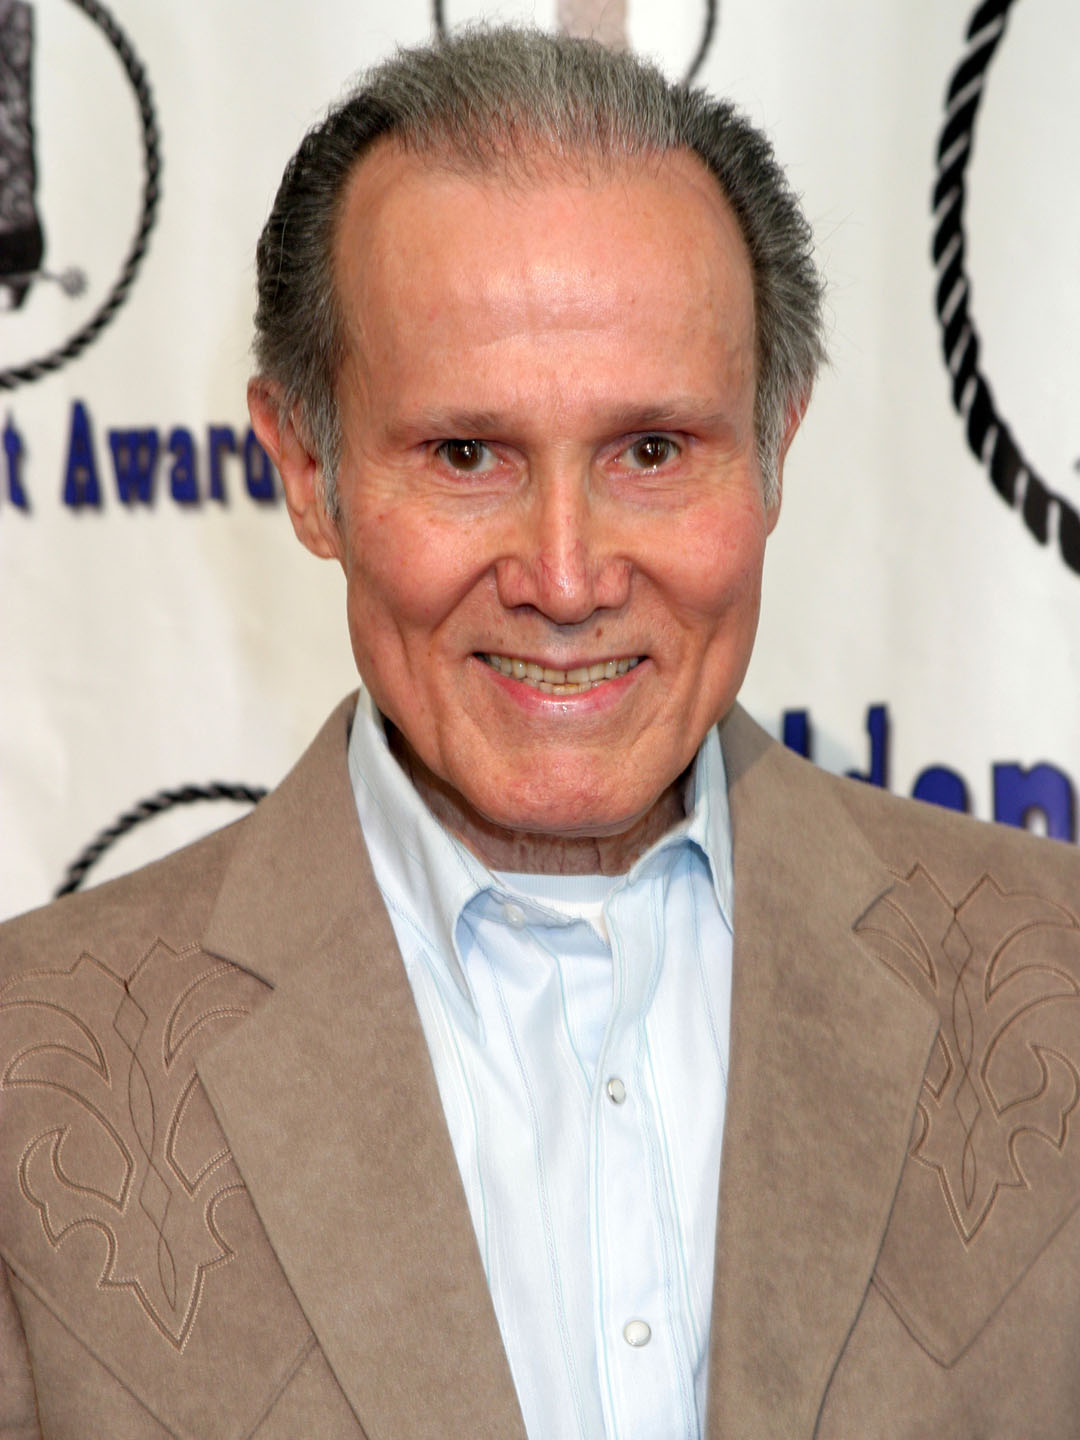 How tall is Henry Silva?